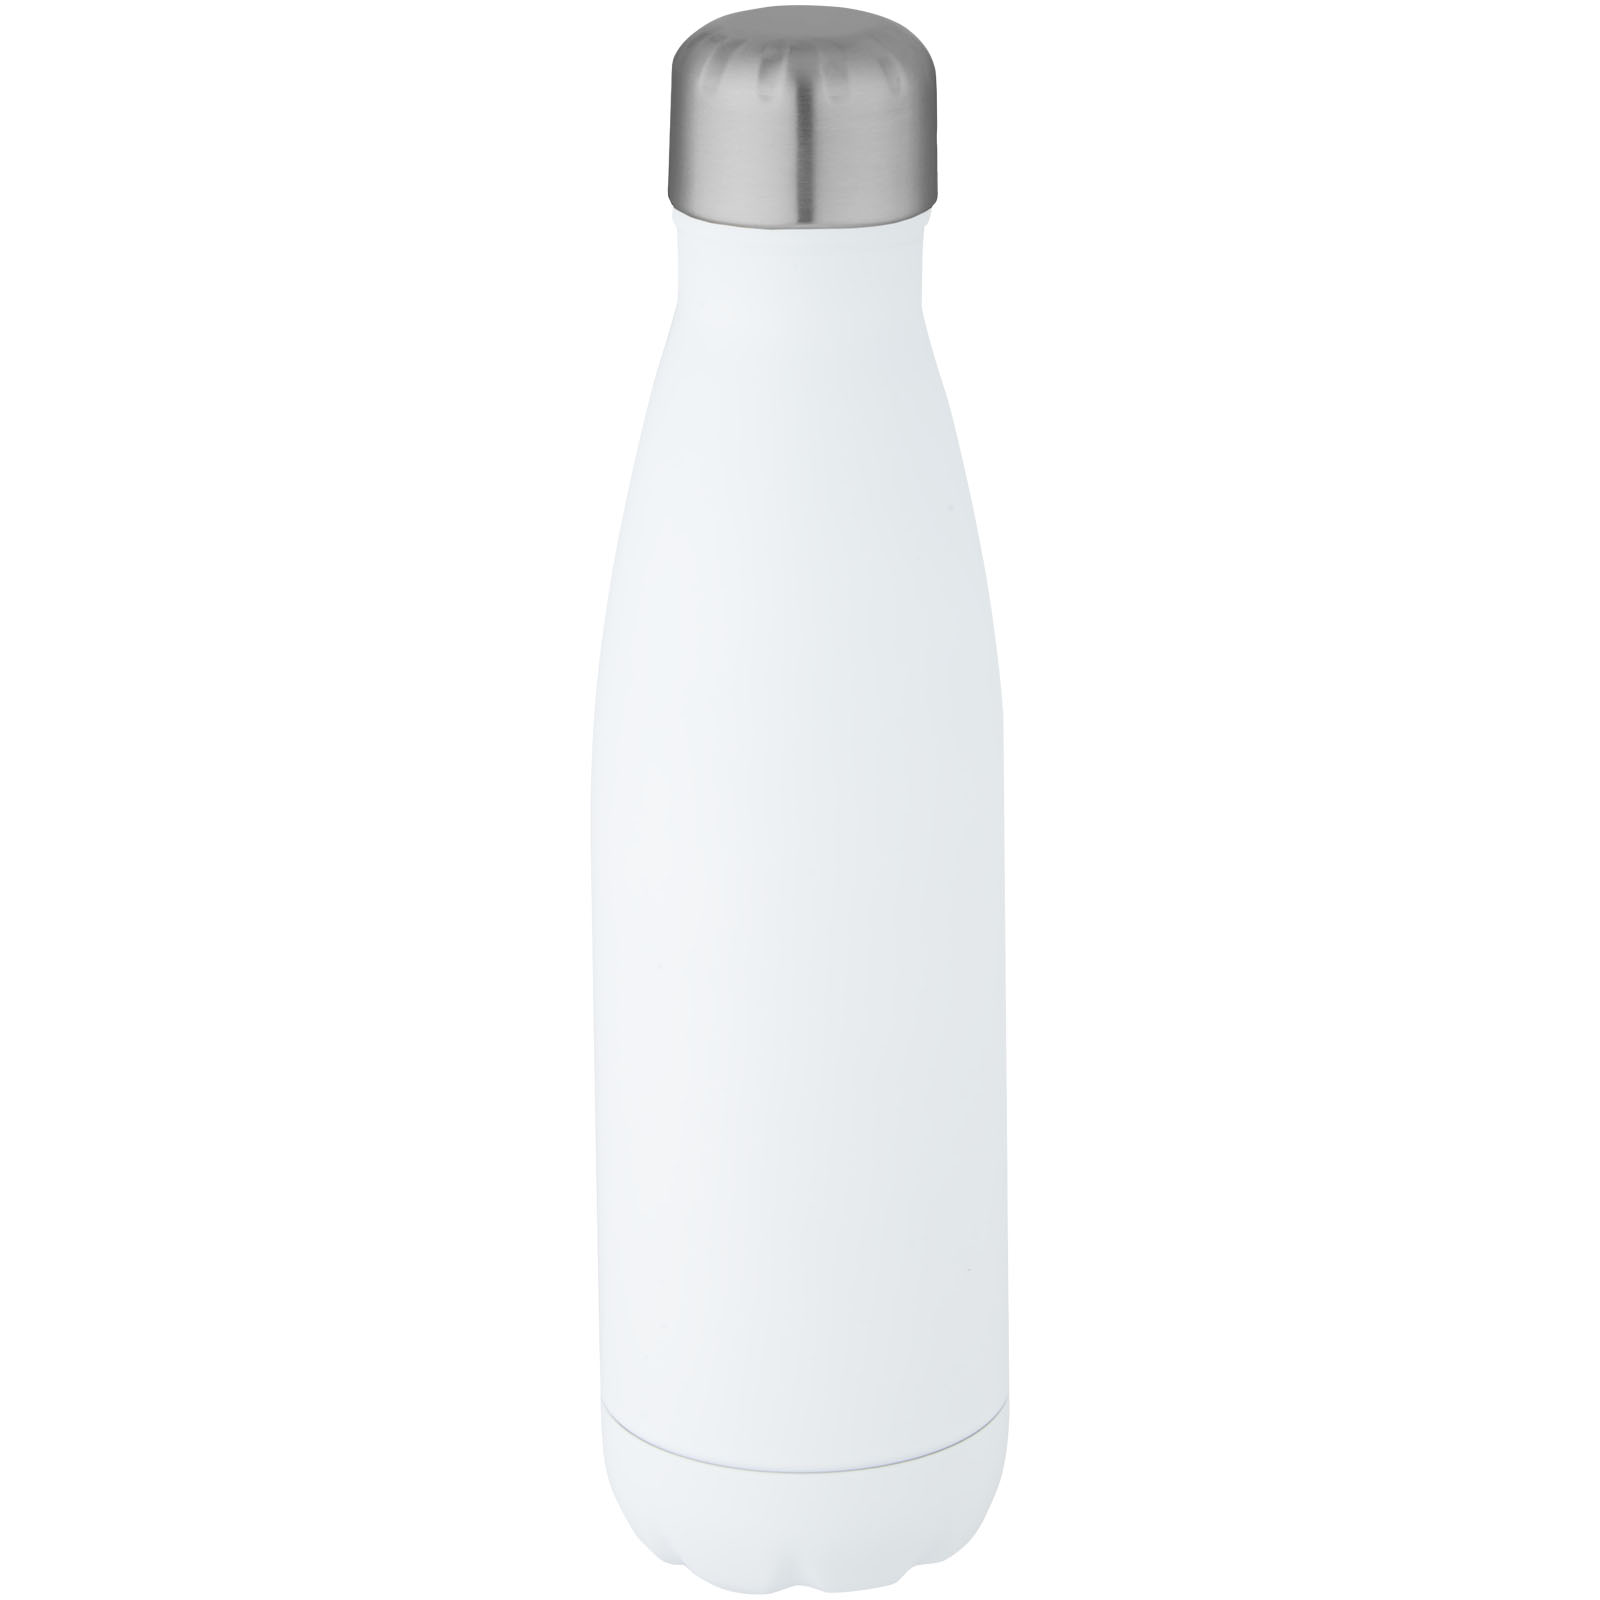 Advertising Insulated bottles - Cove 500 ml RCS certified recycled stainless steel vacuum insulated bottle 